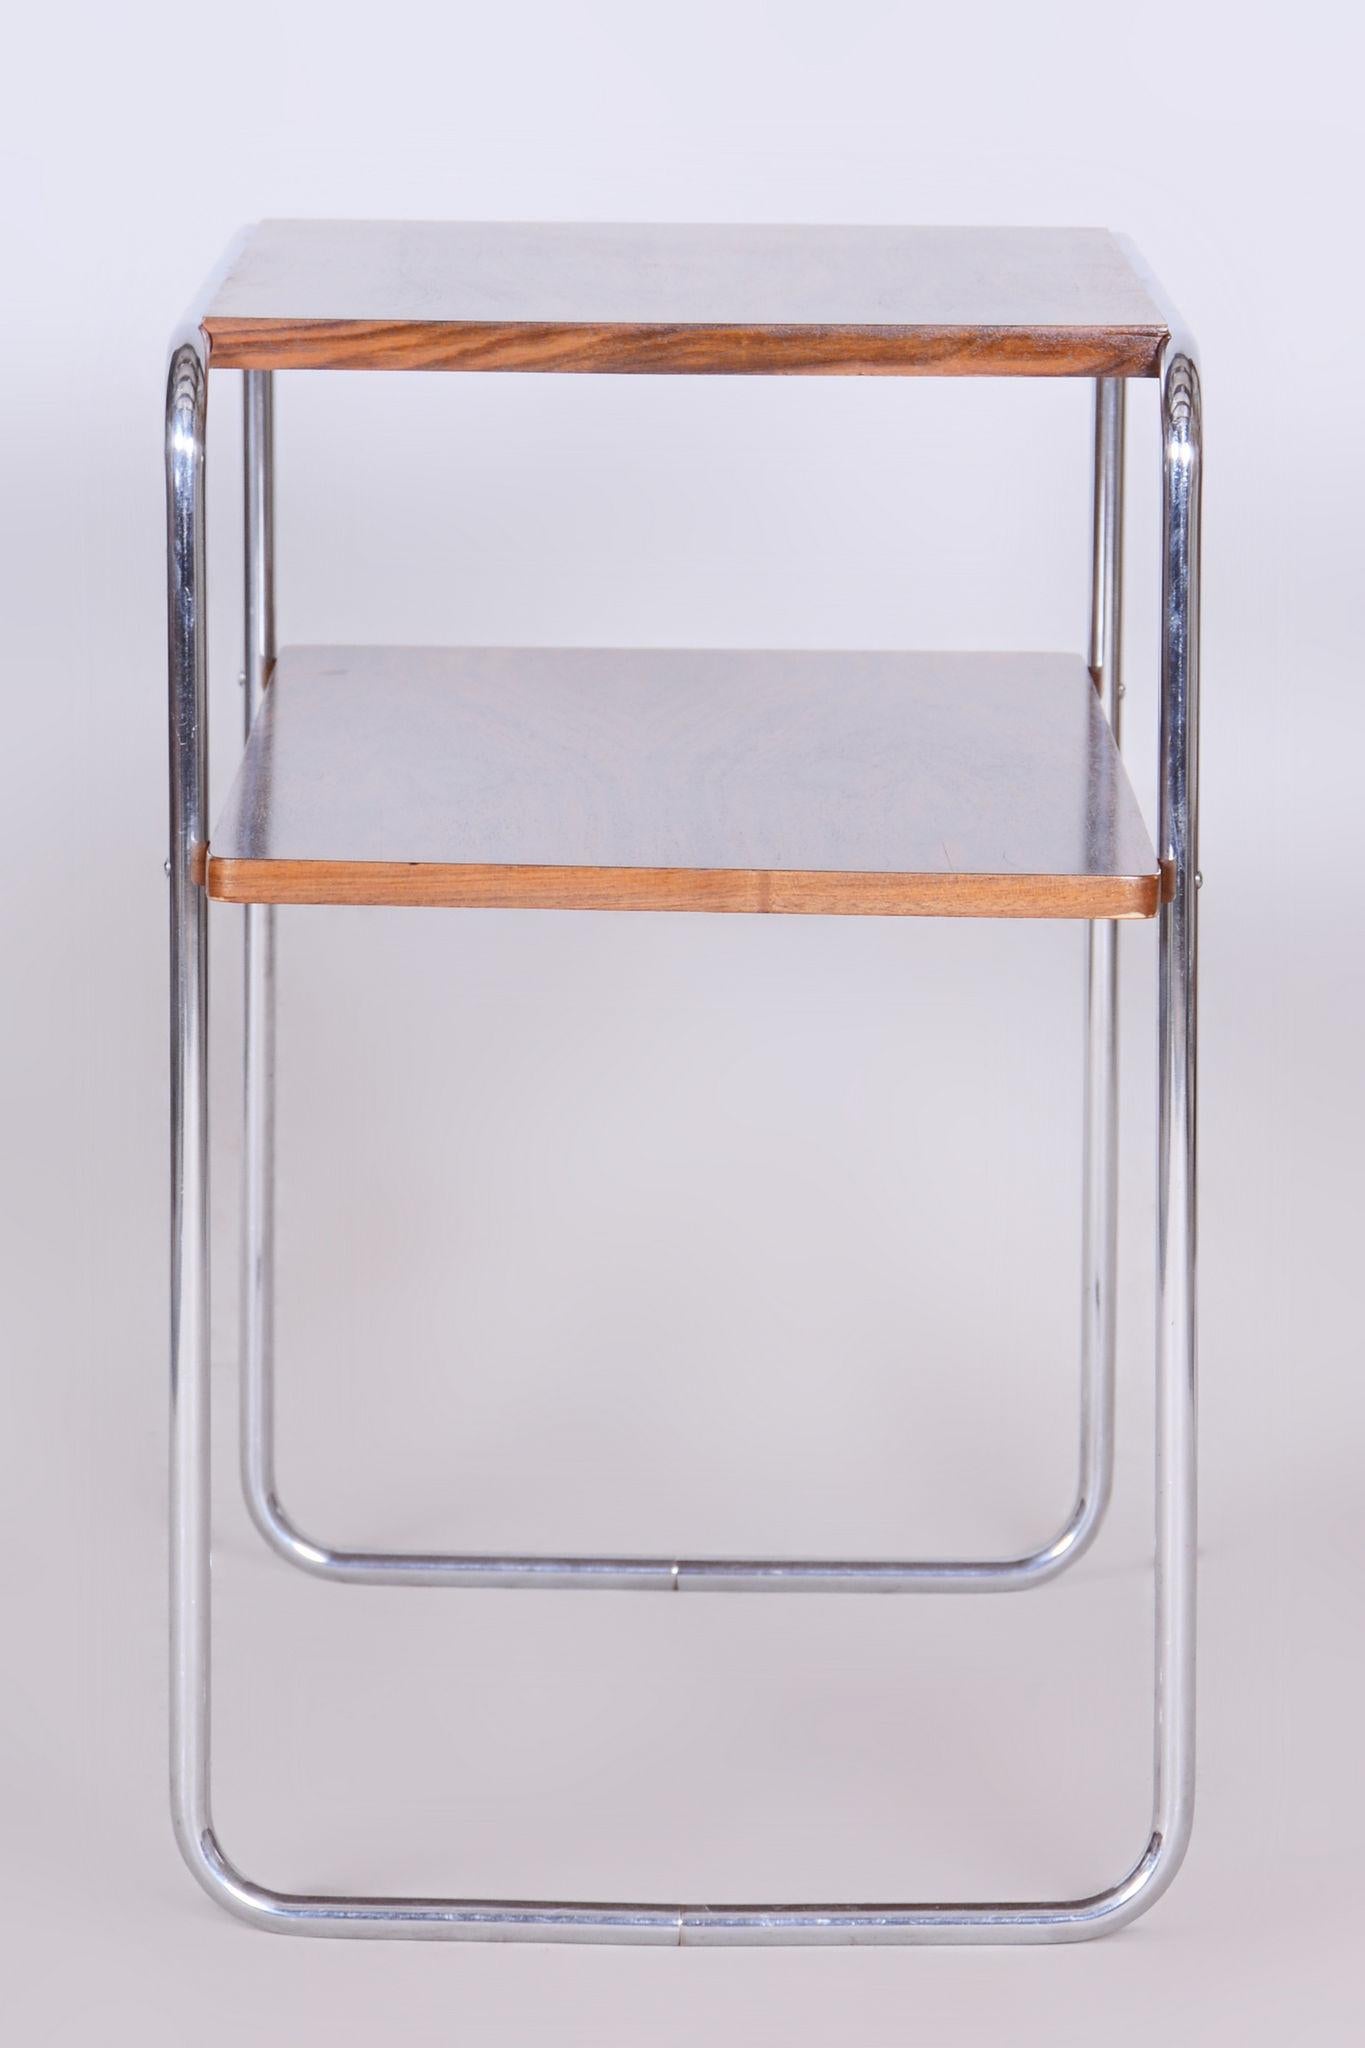 Restored Bauhaus Side Table Made by Hynek Gottwald.

Maker: Hynek Gottwald
Source: Czechia (Czehoslovakia)
Period: 1930-1939
Material: Chrome-plated Steel, Walnut

Revitalized polish.
The chrome parts have been professionally cleaned.	
	
Made by